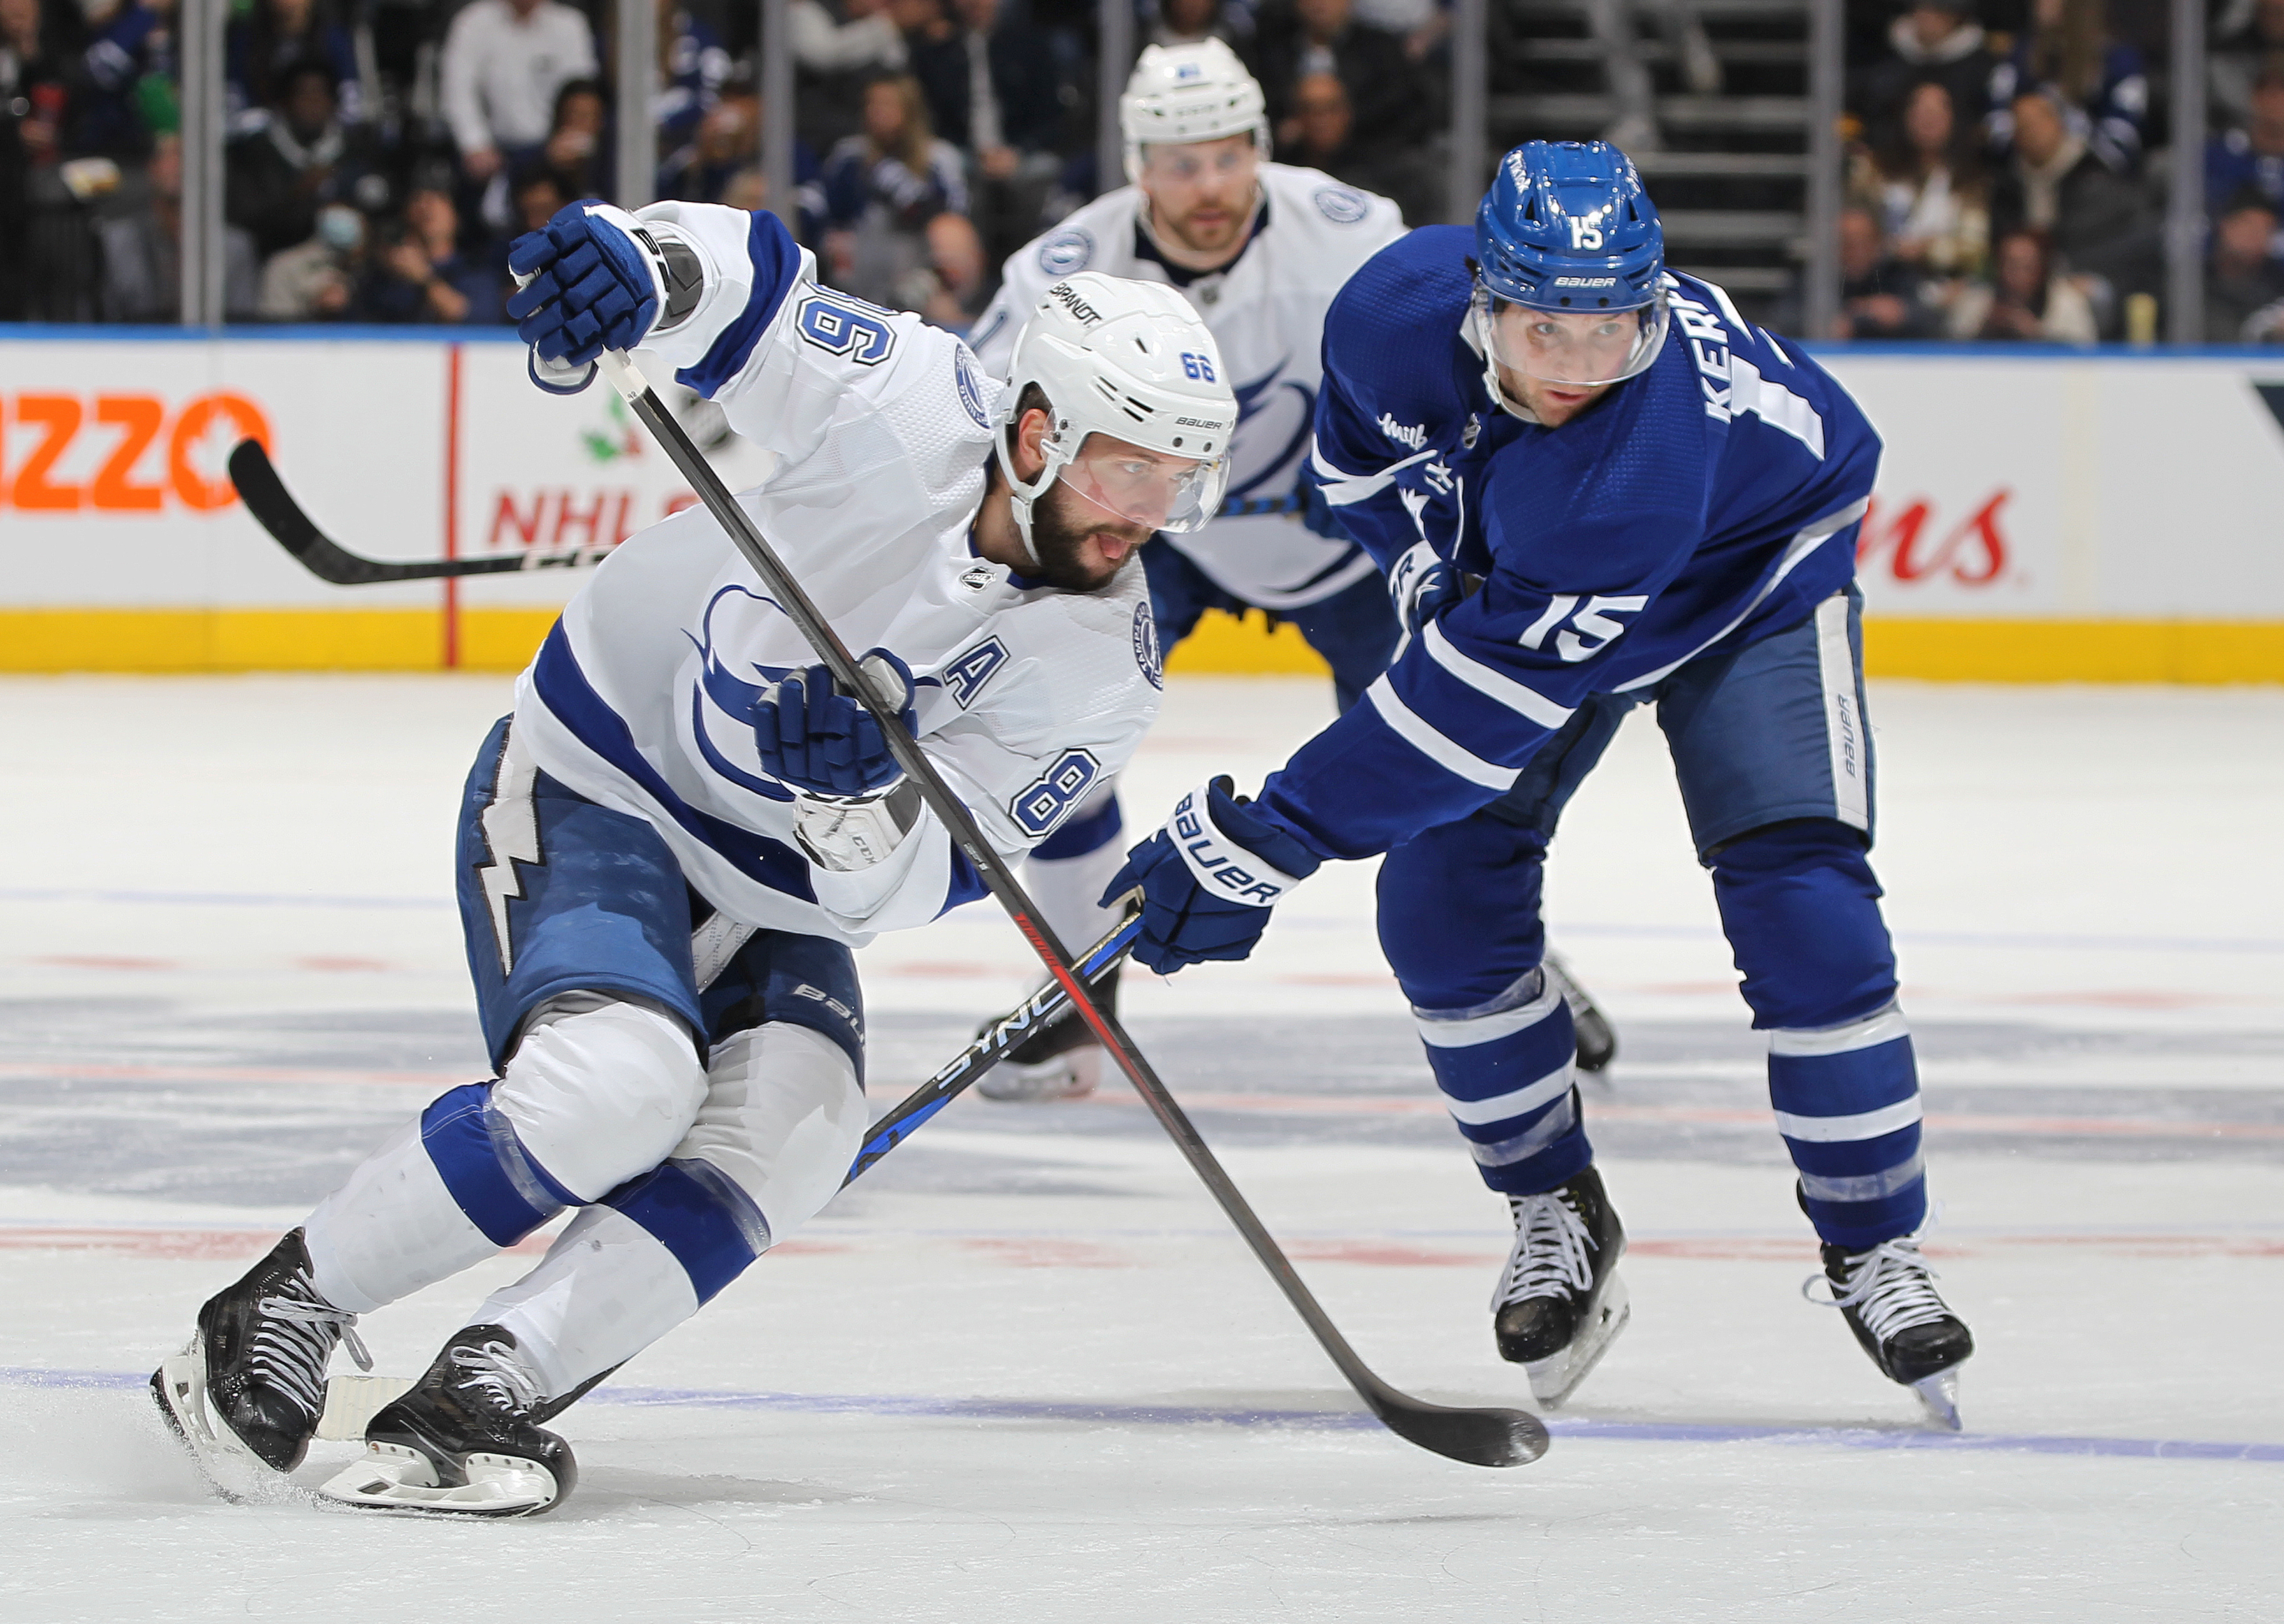 2023 NHL playoff preview: Maple Leafs vs. Lightning - The Athletic